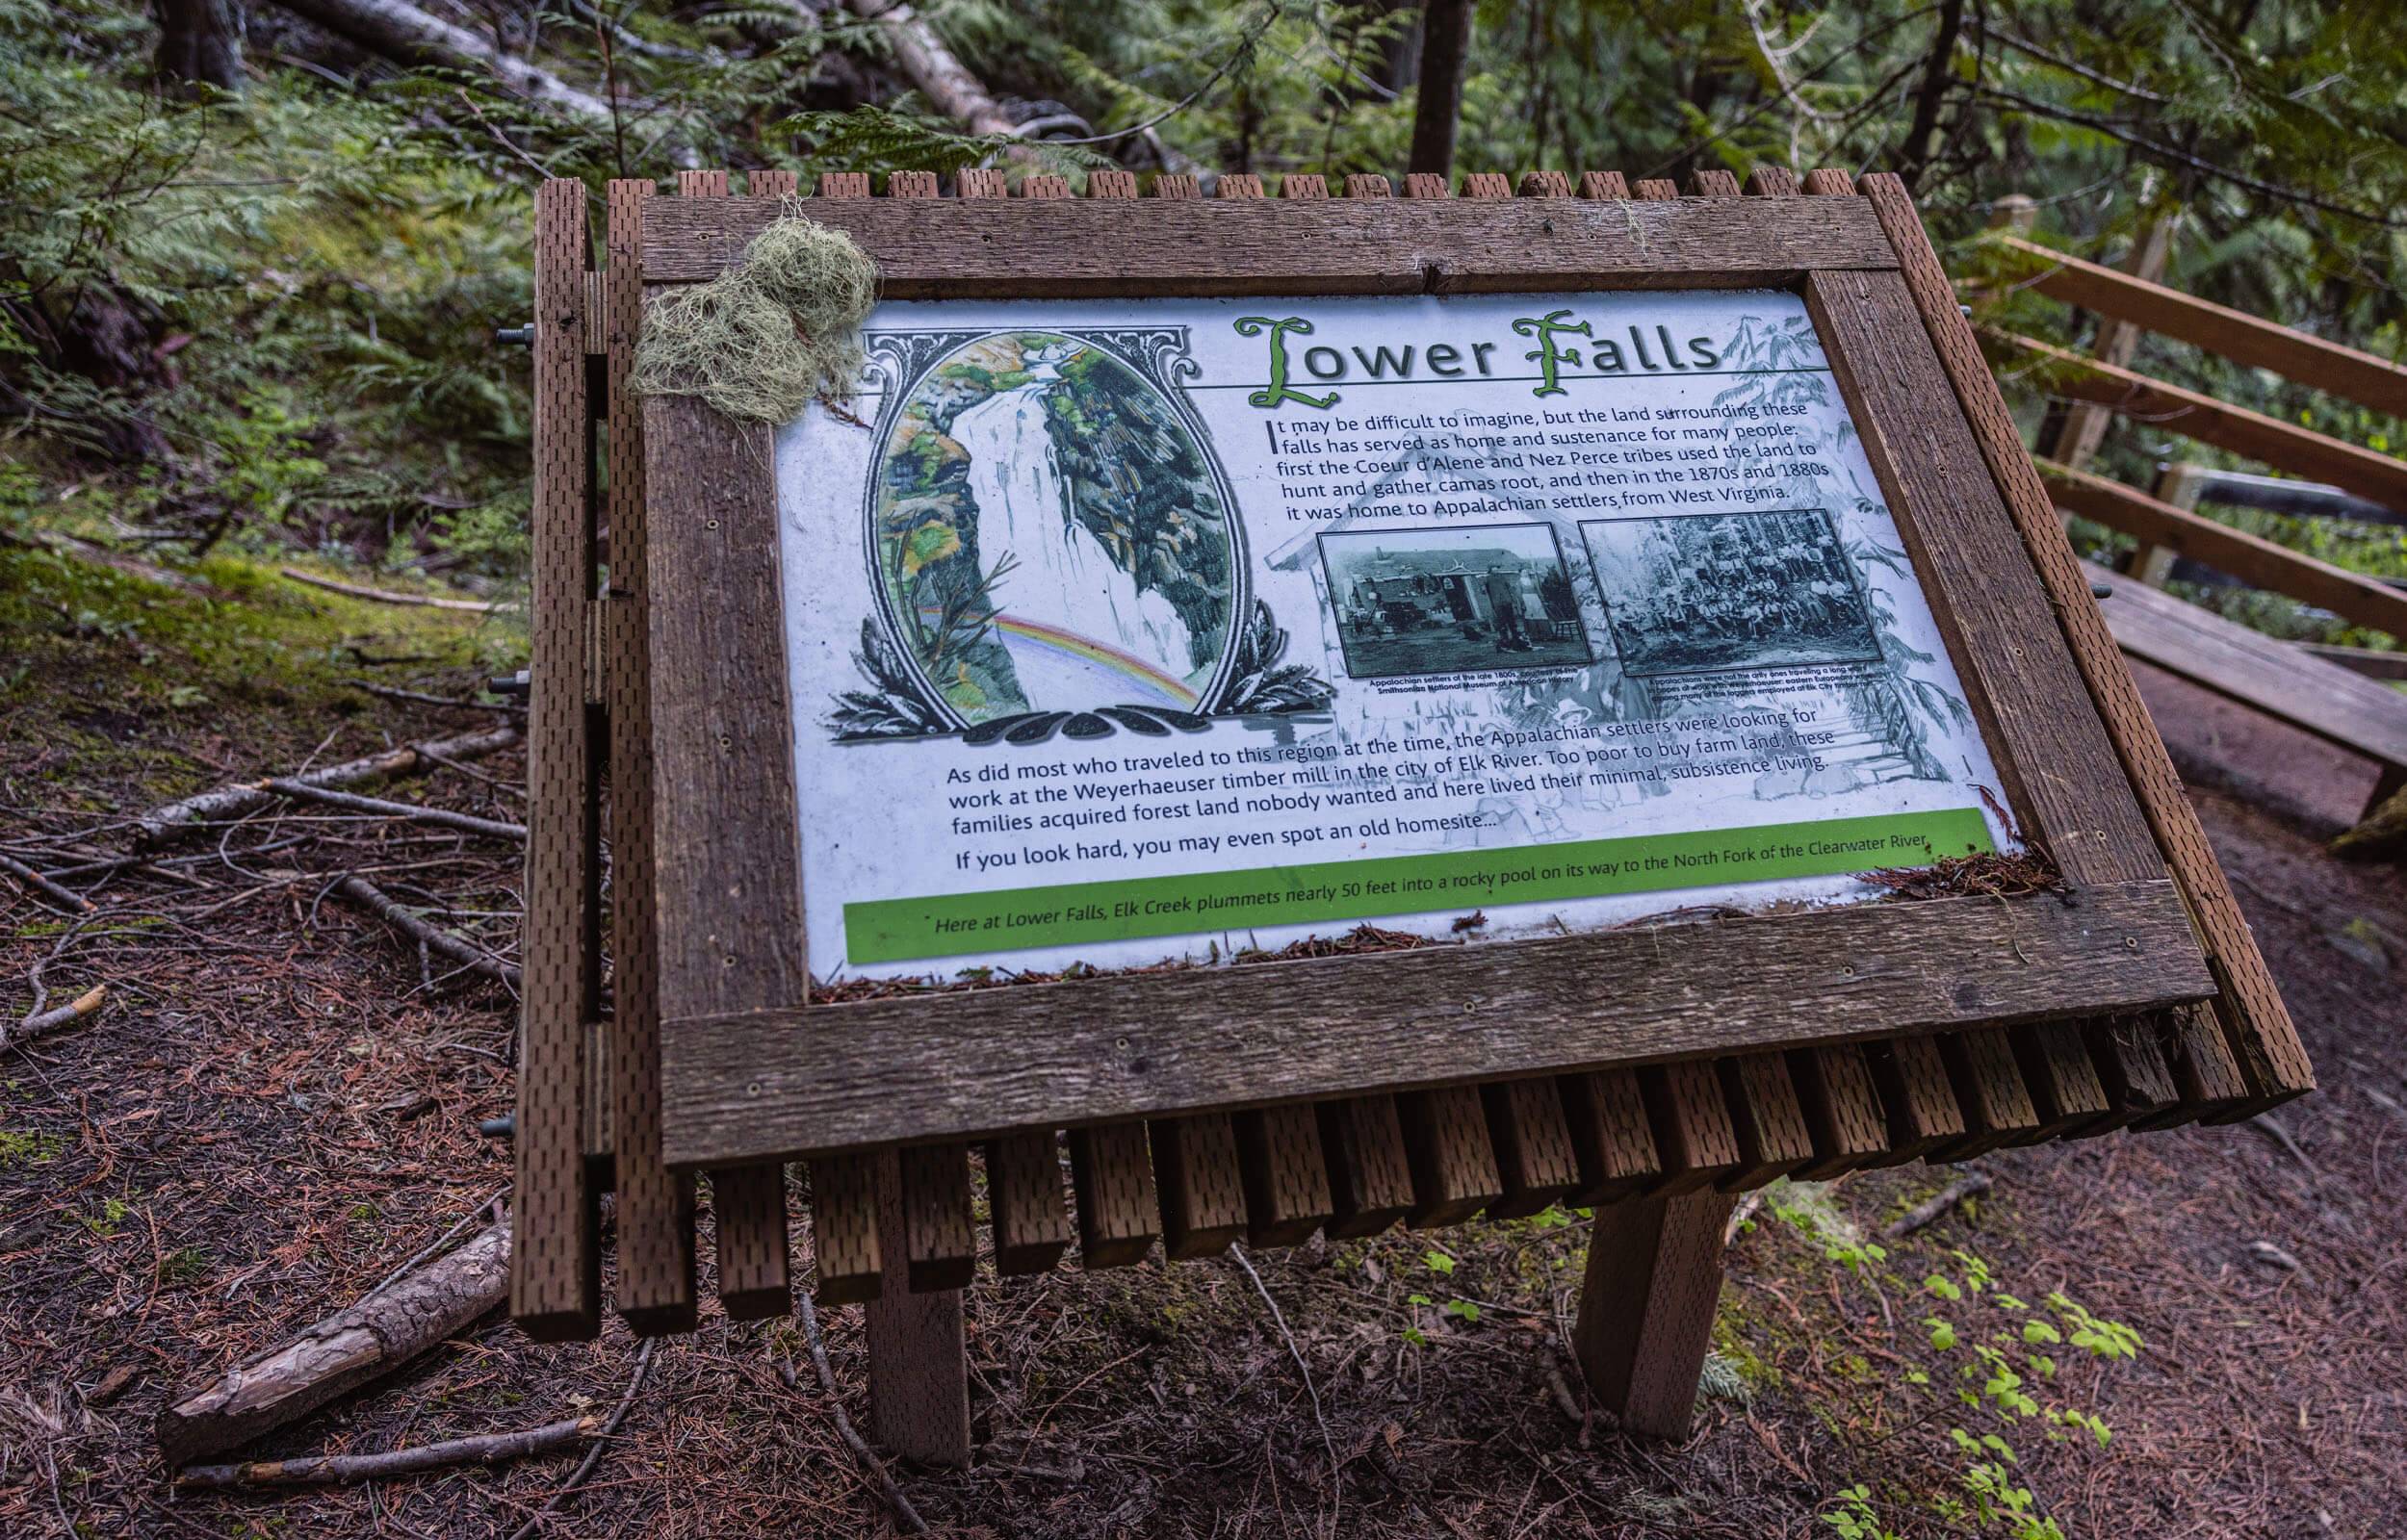 Wooden signage for the Elk Creek Lower Falls sharing history facts.